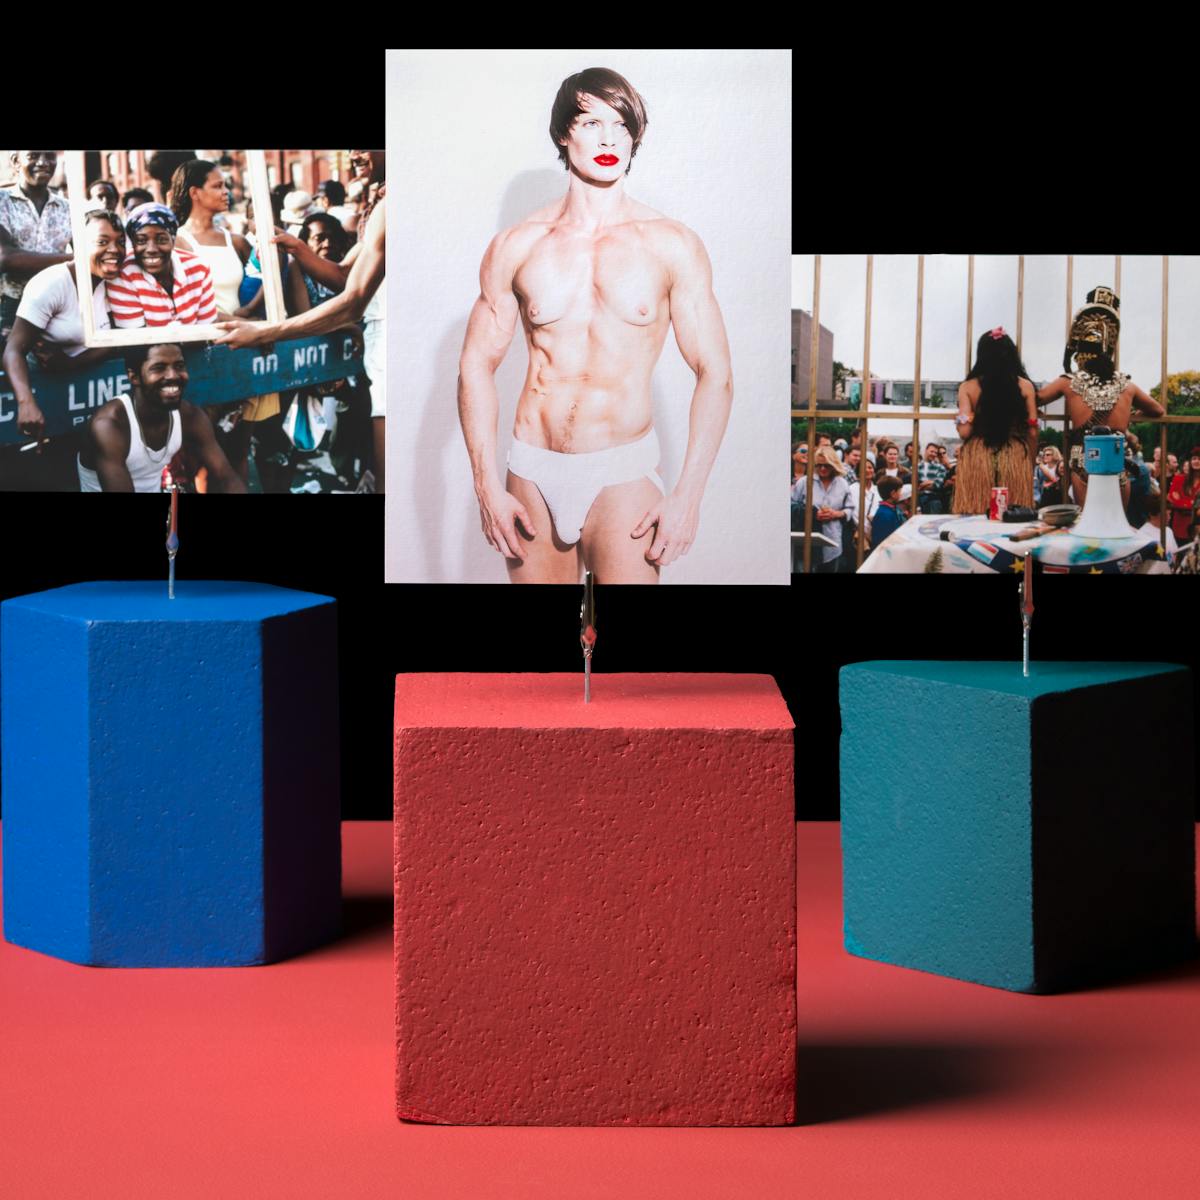 Photograph of three shapes holding three images on a red tabletop with crocodile clips.  The red cube is holding a portrait image of a largely naked person with red lipstick and white thong.  The teal triangle is holding a picture of a performance where two people, a man and a woman, are in costume with their backs to the camera whilst addressing a crowd.  A blue hexagon is holding a picture of a crowd of people standing over a ‘do not cross’ barrier.  The mood of the crowd is joyous.  Two women are posing to the camera with beaming smiles whilst a picture frame is being held in front of them by another person.  The picture frame is also resting on the head of a fourth person.